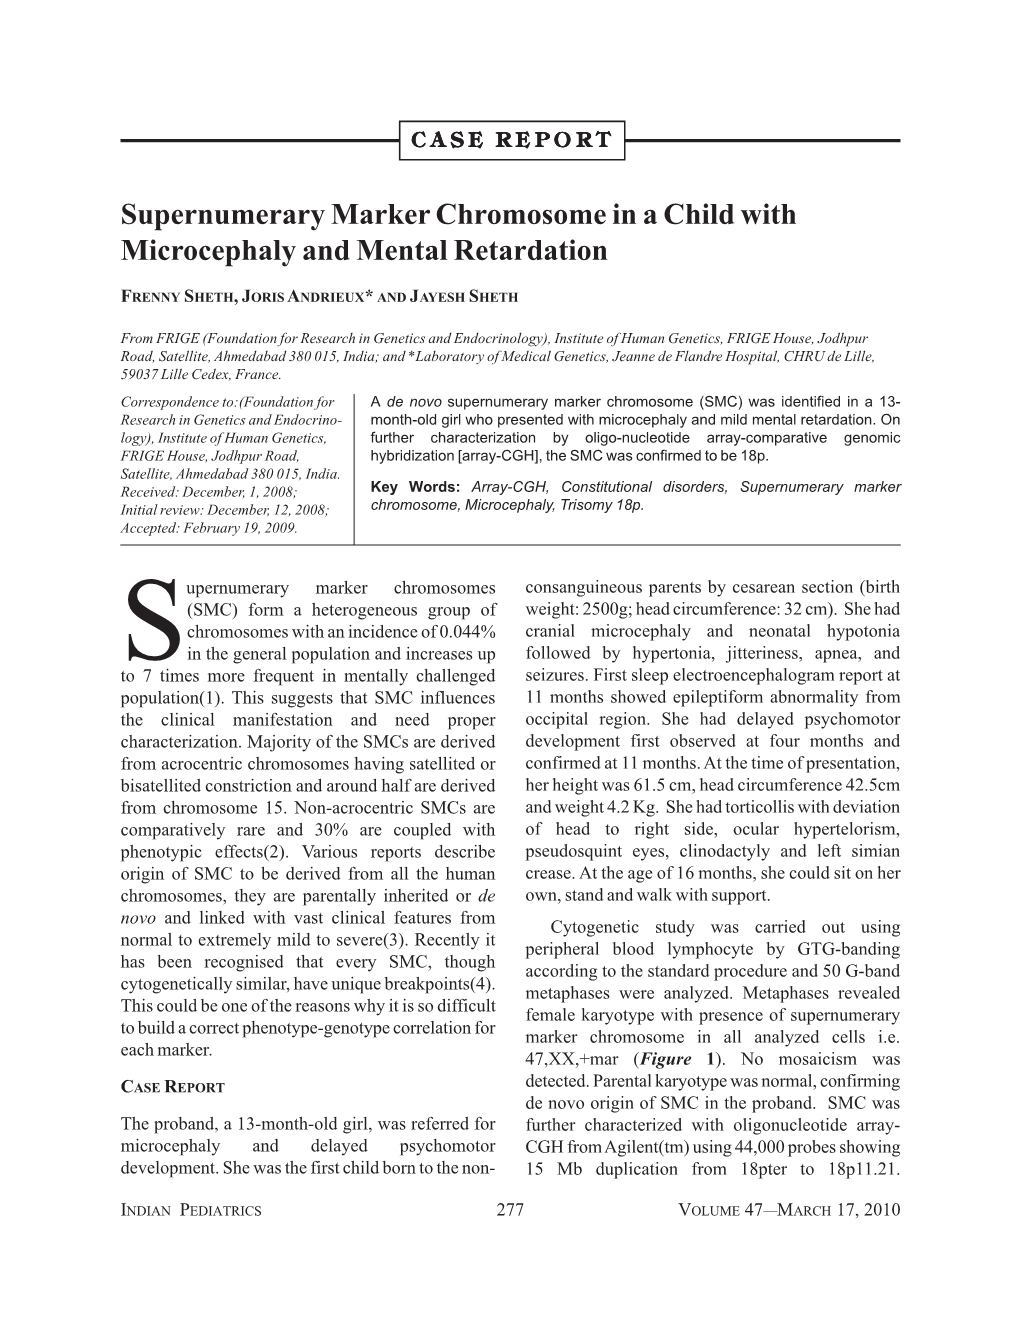 Supernumerary Marker Chromosome in a Child with Microcephaly and Mental Retardation